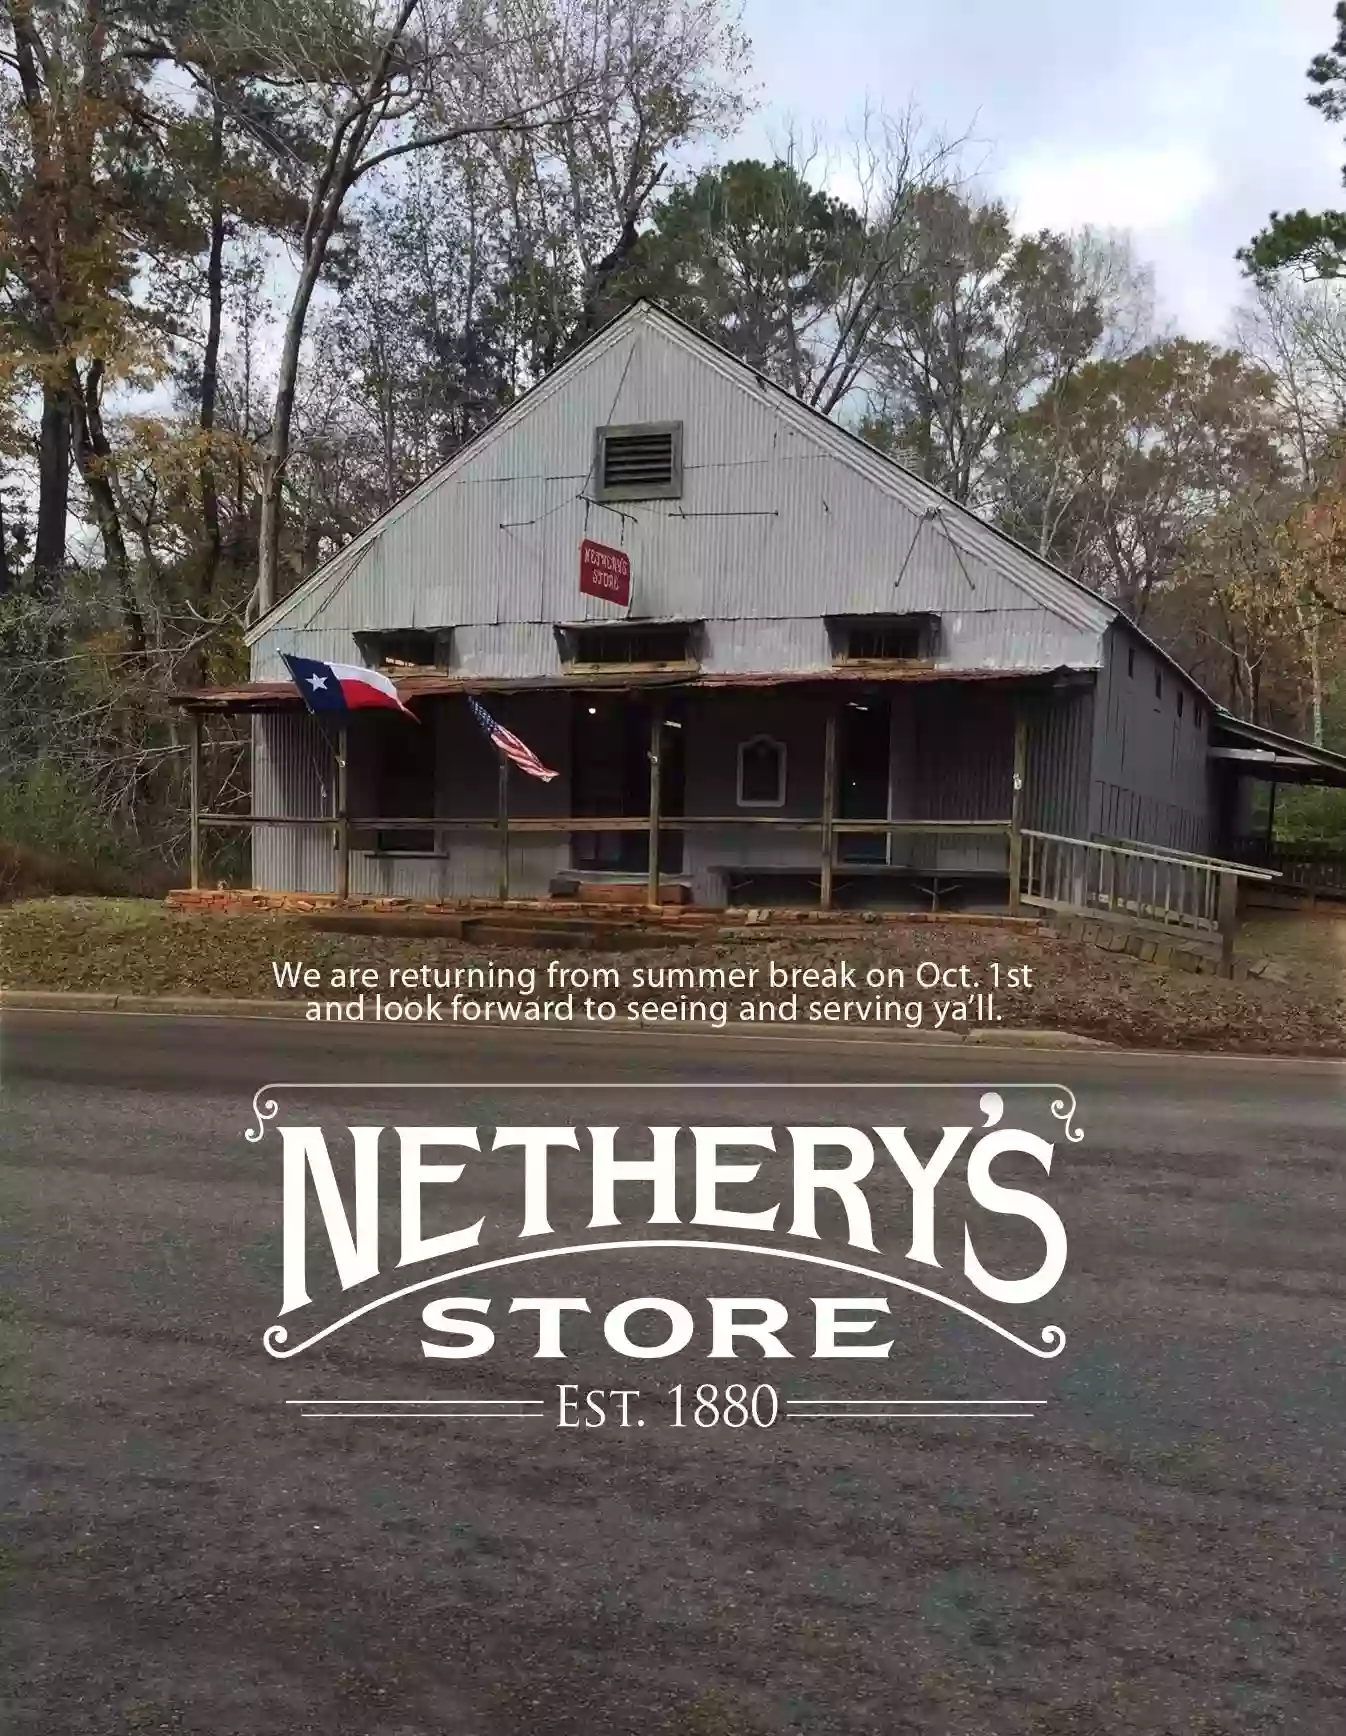 Nethery's Store